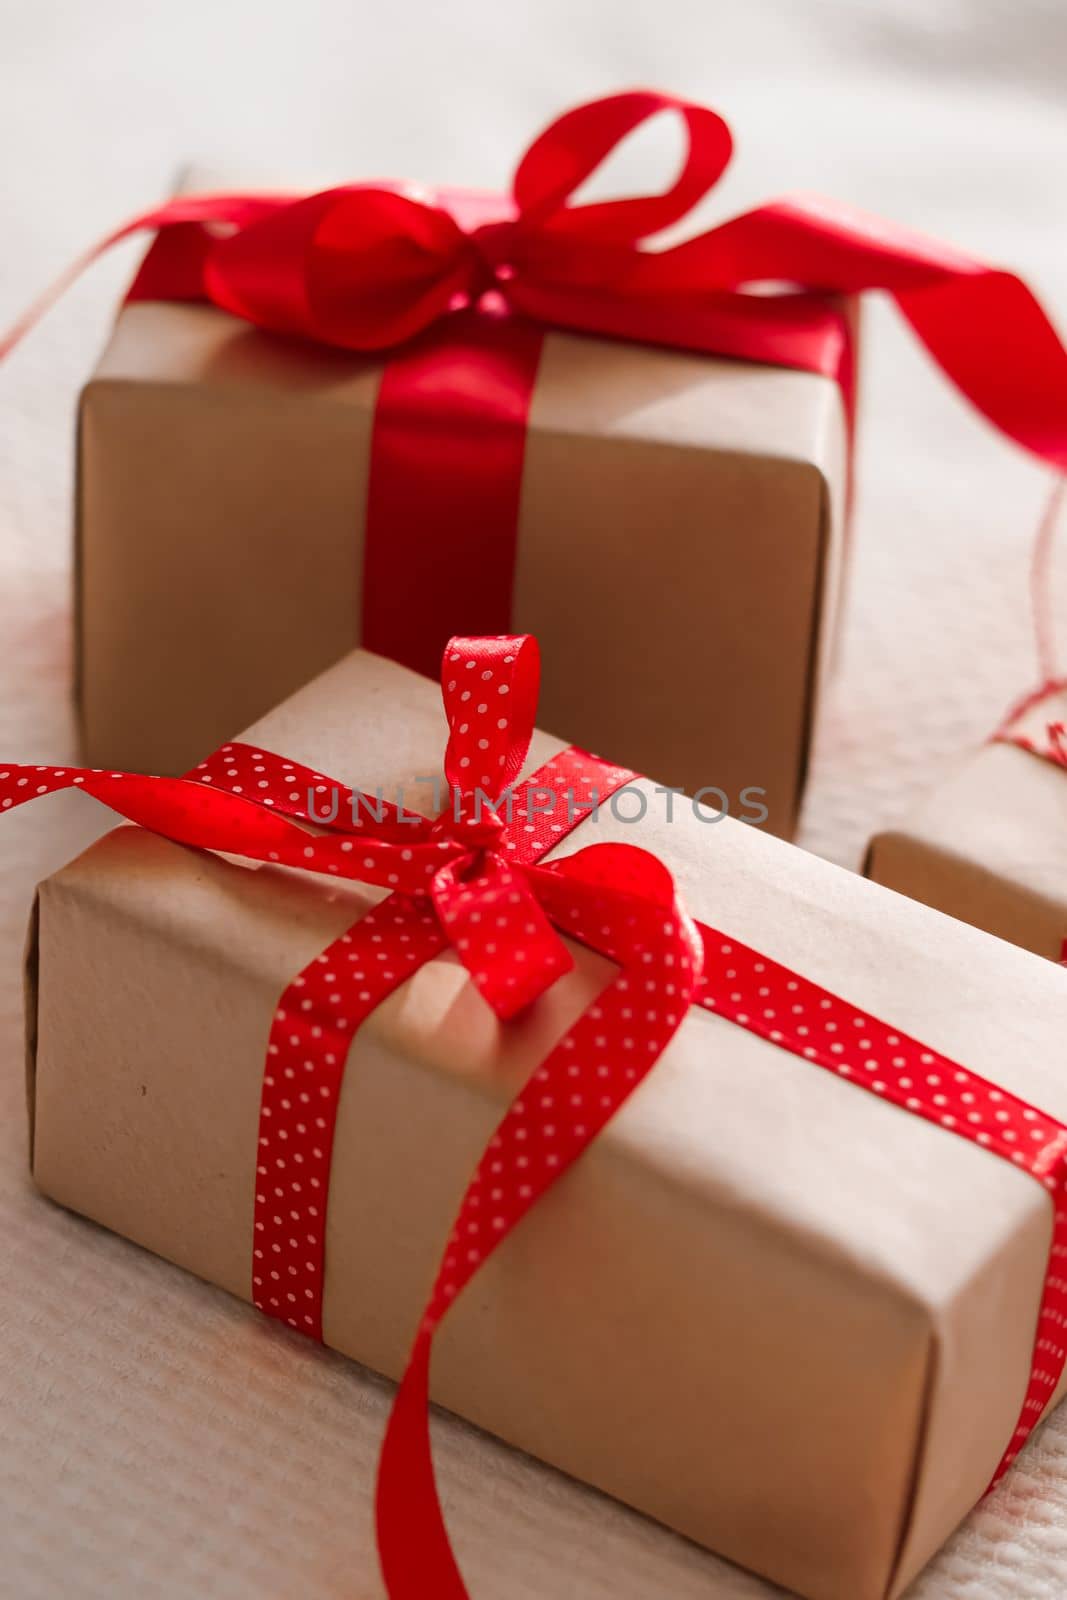 Valentines Day, birthday and holidays, gifts and presents with red ribbons.